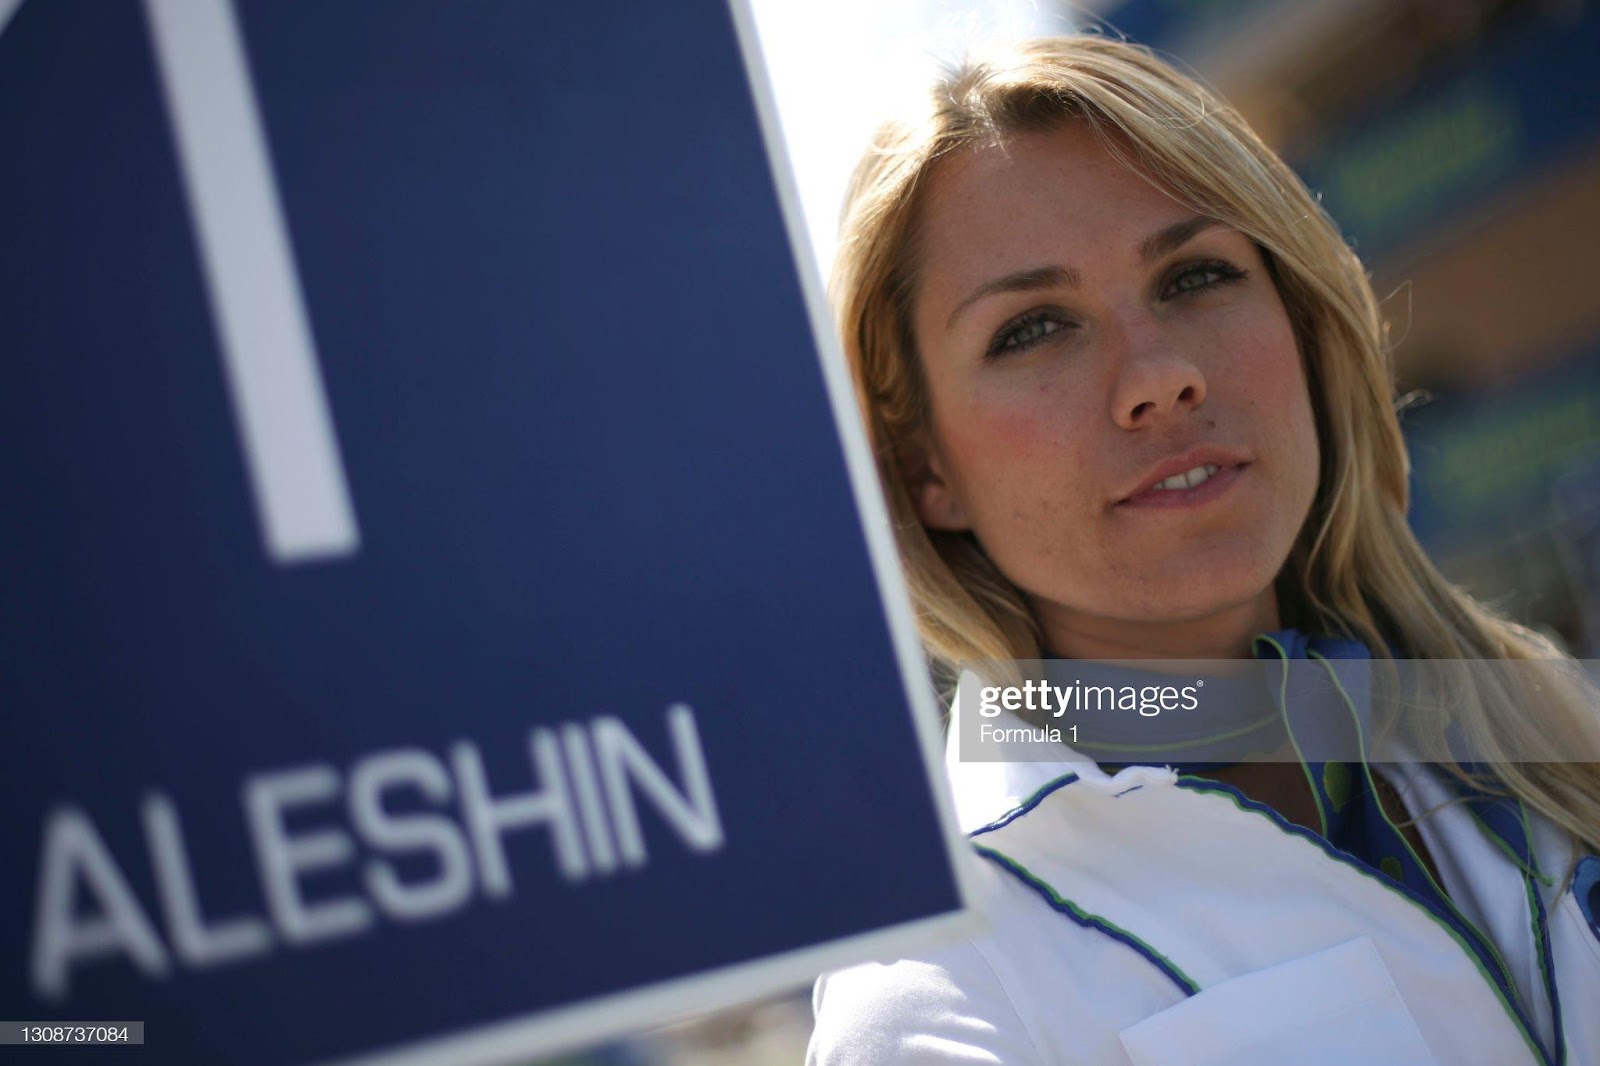 D:\Documenti\posts\posts\Women and motorsport\foto\Getty e altre\Barcelona\series-round-2-saturday-racebarcelona-spain-12th-may-2007-grid-girls-picture-id1308737084.jpg